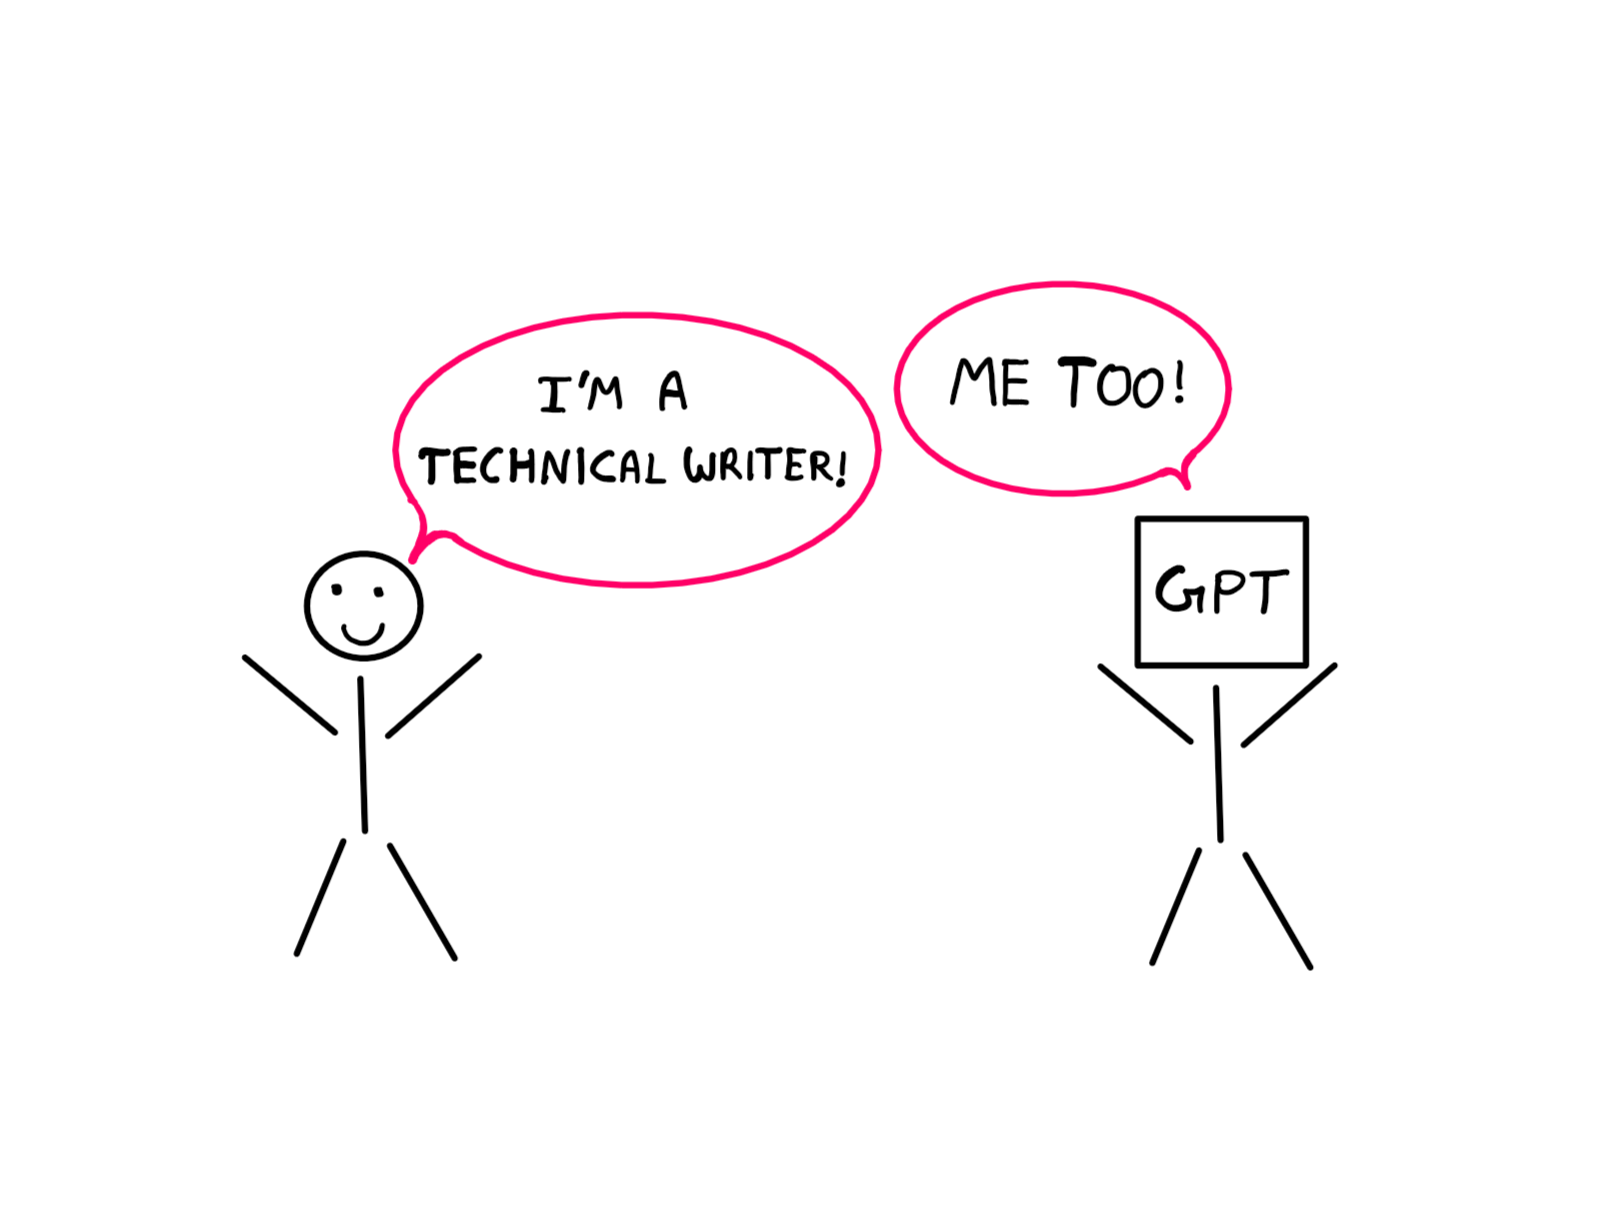 How To Be A Good Technical Writer; The art of technical writing: It's not for everyone!- A stick figure on the left exclaims happily, "I am a good technical writer". A stick figure-like entity on the right exclaims "Me too!" This stick figure-like entity does not have a human head, but a block with "GPT" written on it.